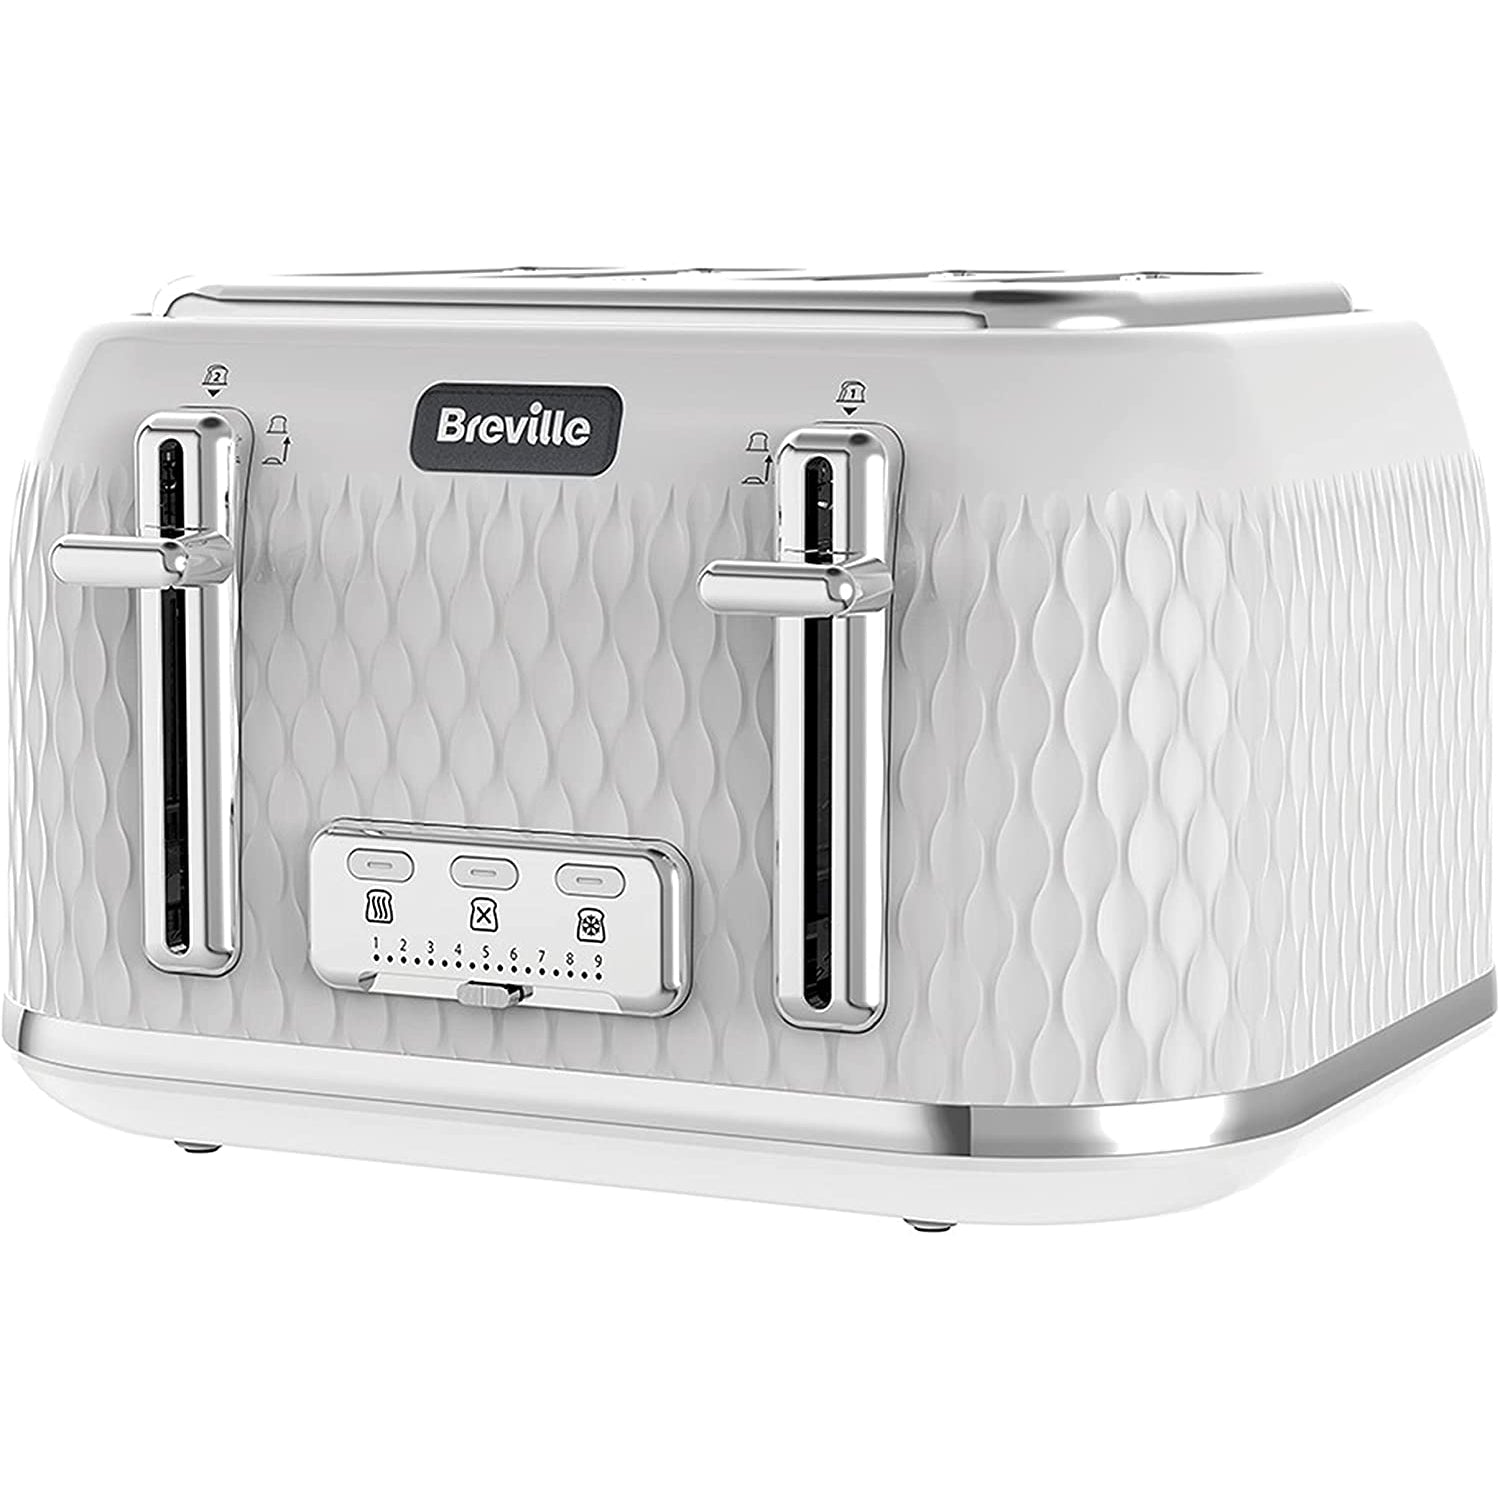 Breville Curve Collection 4-Slice Toaster, White